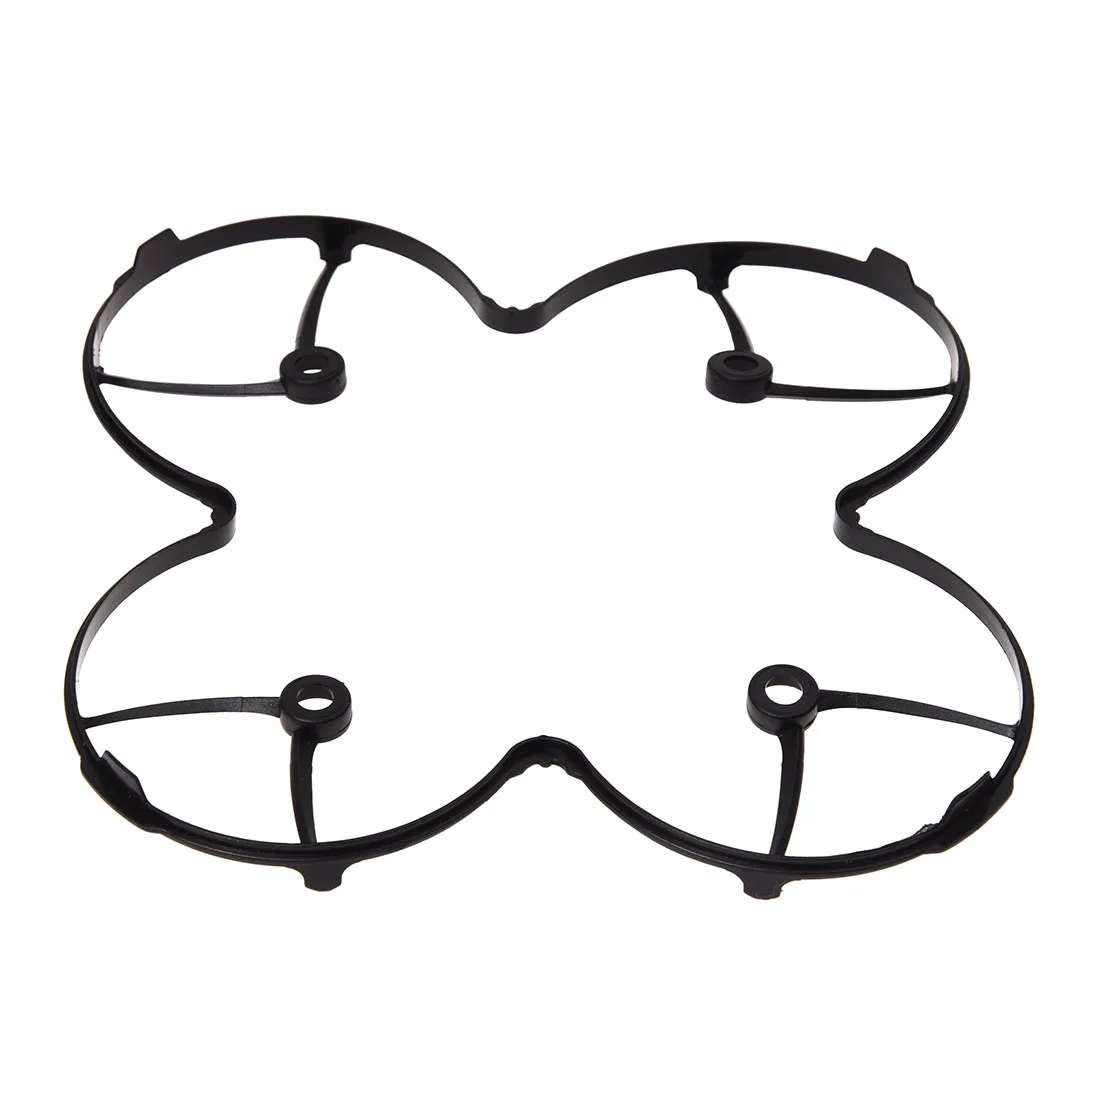 

20 piece set Propeller blades with Helices Protective cover For HUBSAN X4 H107 H107C H107D Quadcopter, Black+White